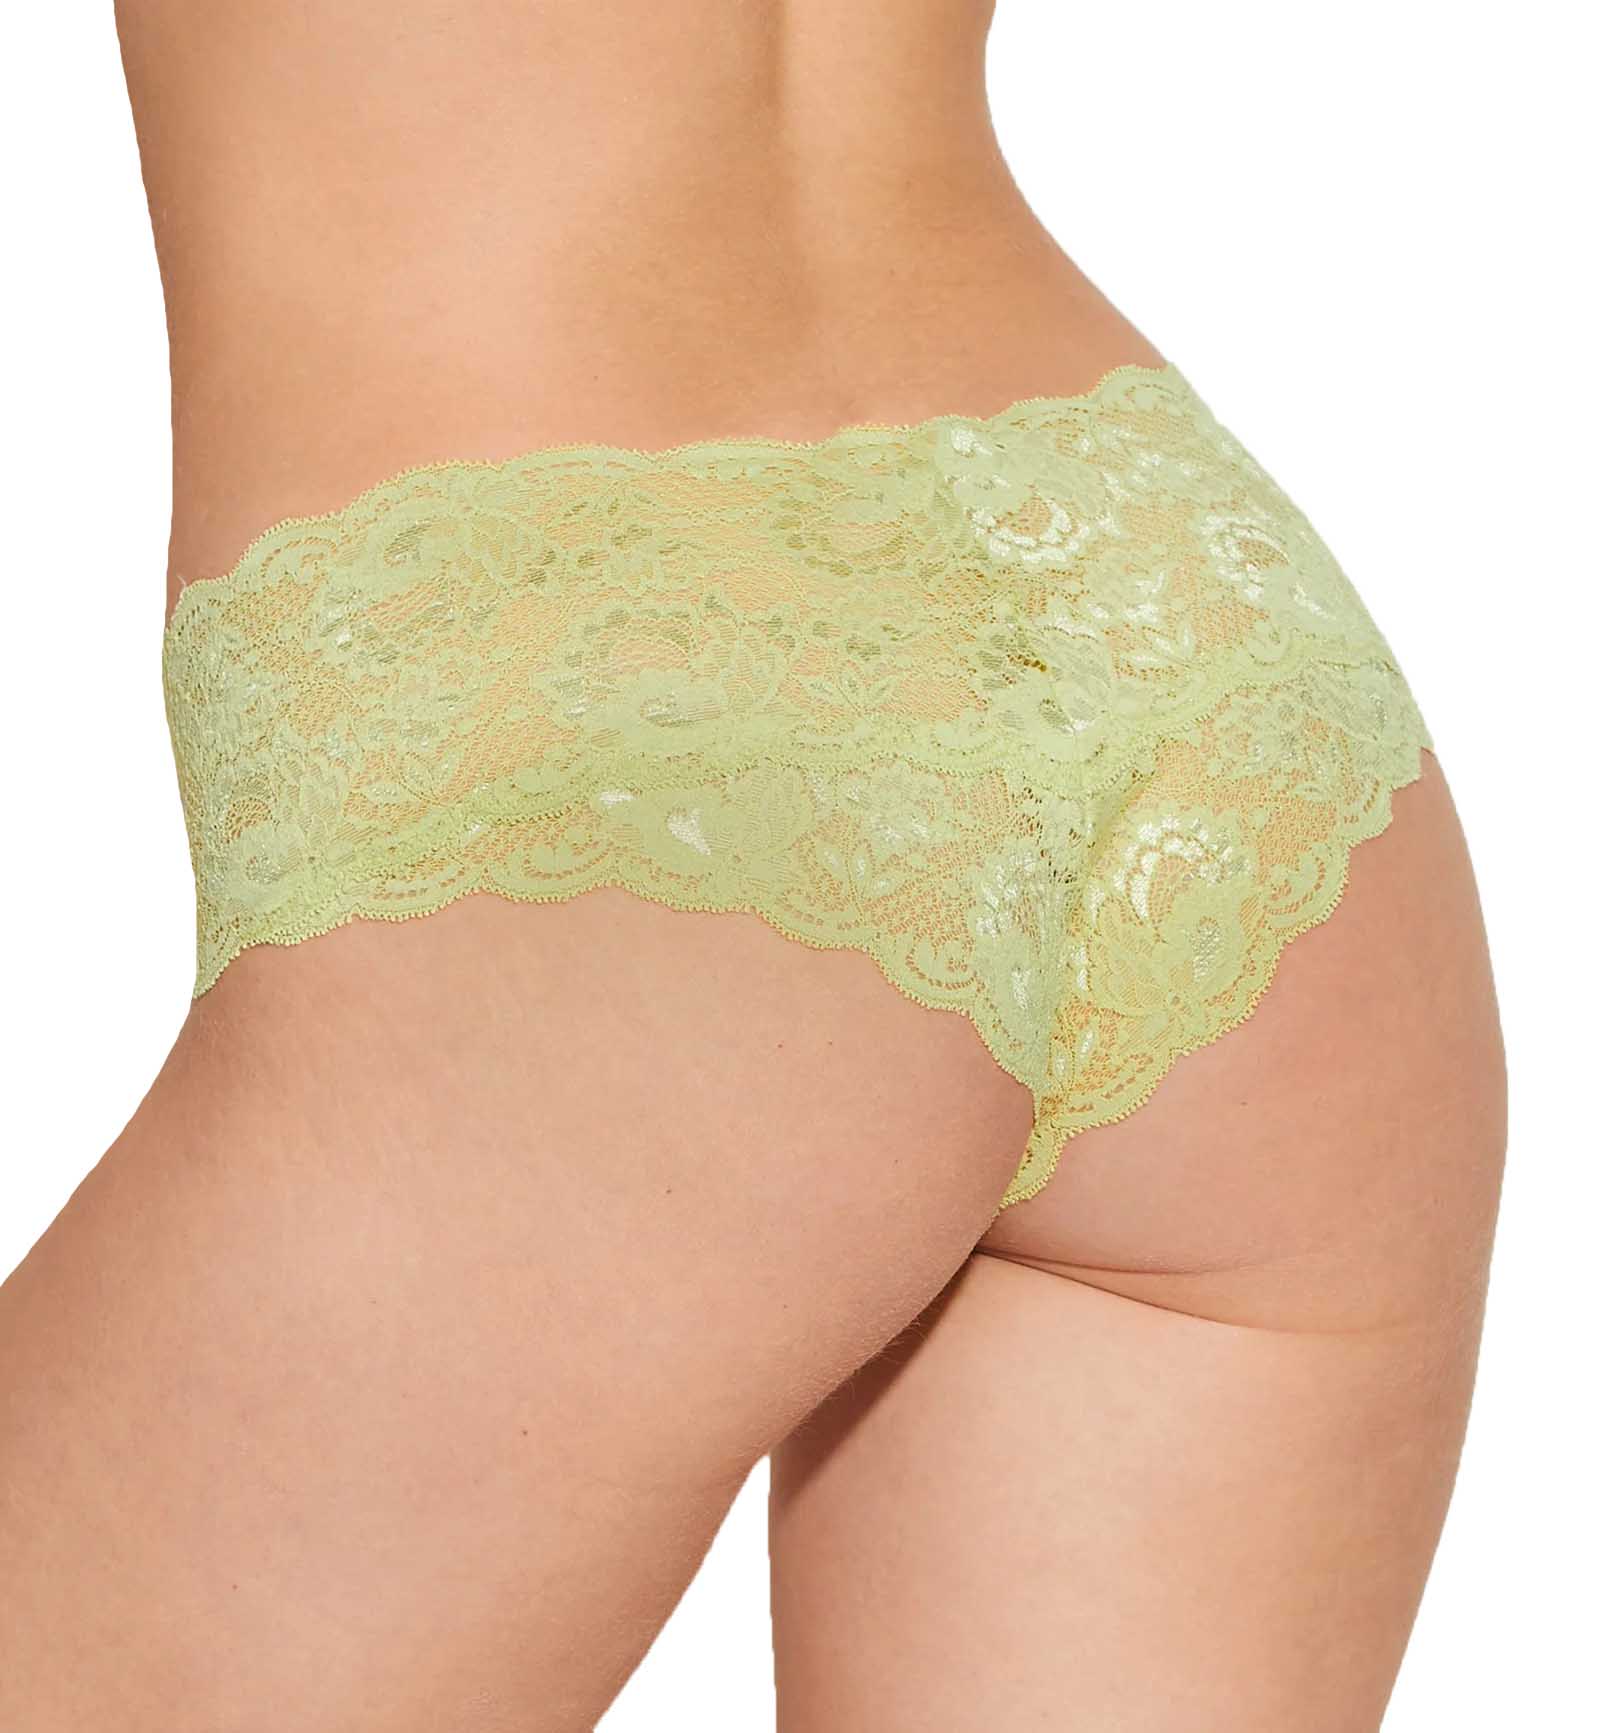 Cosabella Never Say Never Hottie Lowrider Hotpant (NEVER07ZL),S/M,Chakra Green - Chakra Green,S/M